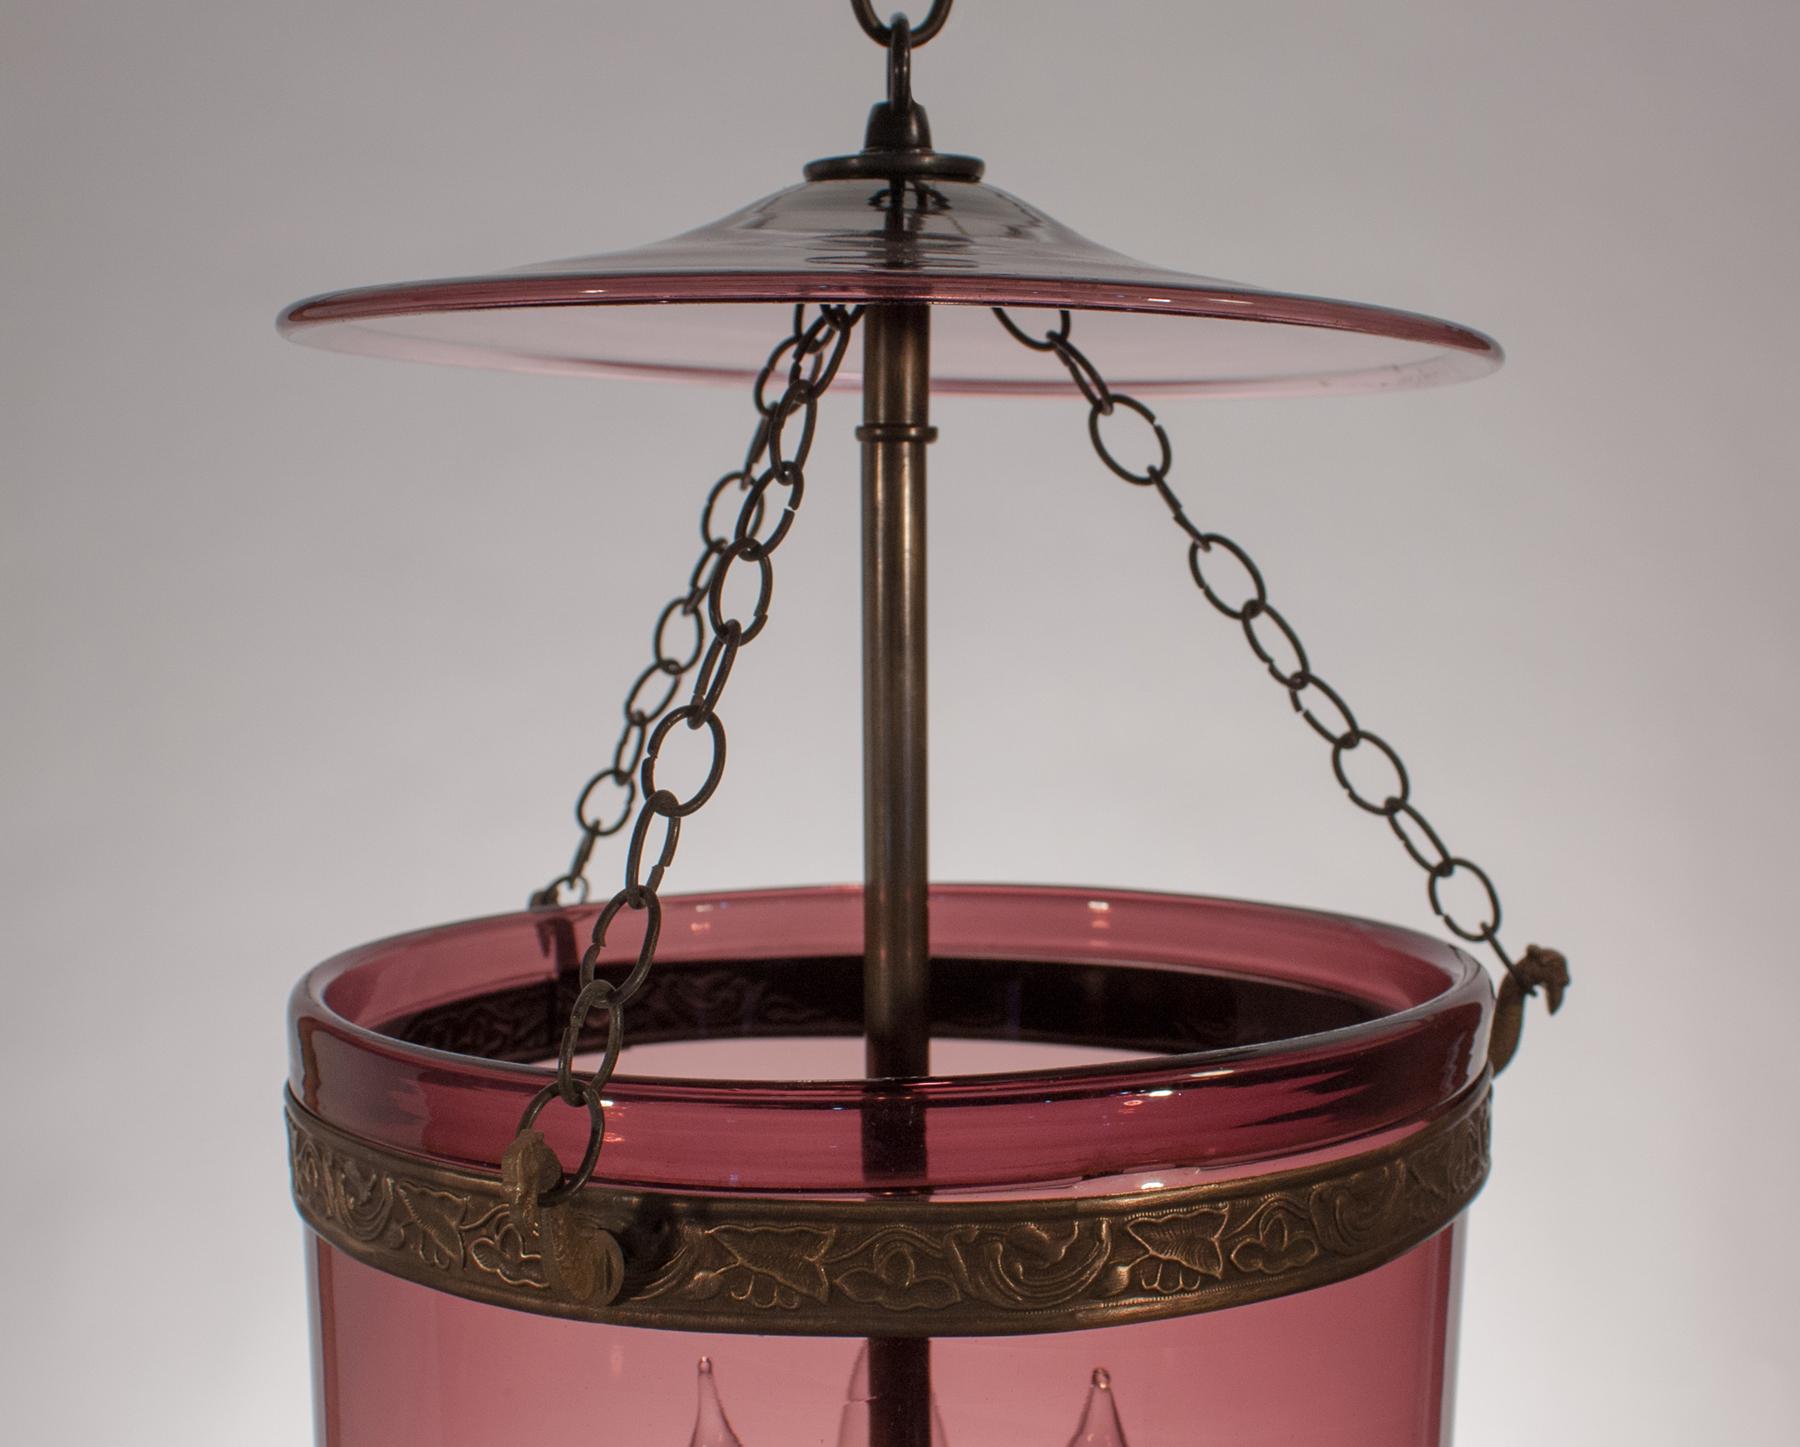 Embossed 19th Century Bell Jar Lantern with Amethyst Colored Glass